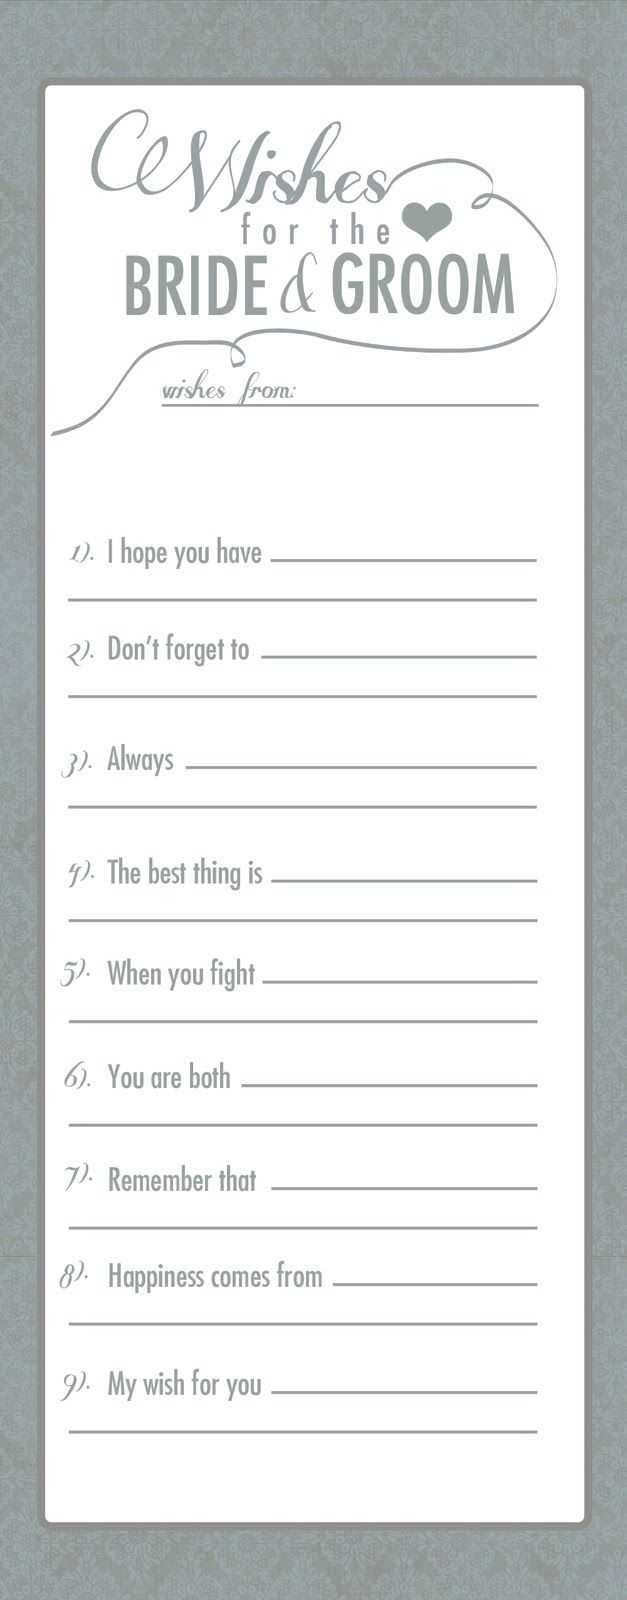 Wedding Stationery Breakdown Inside Marriage Advice Cards Templates